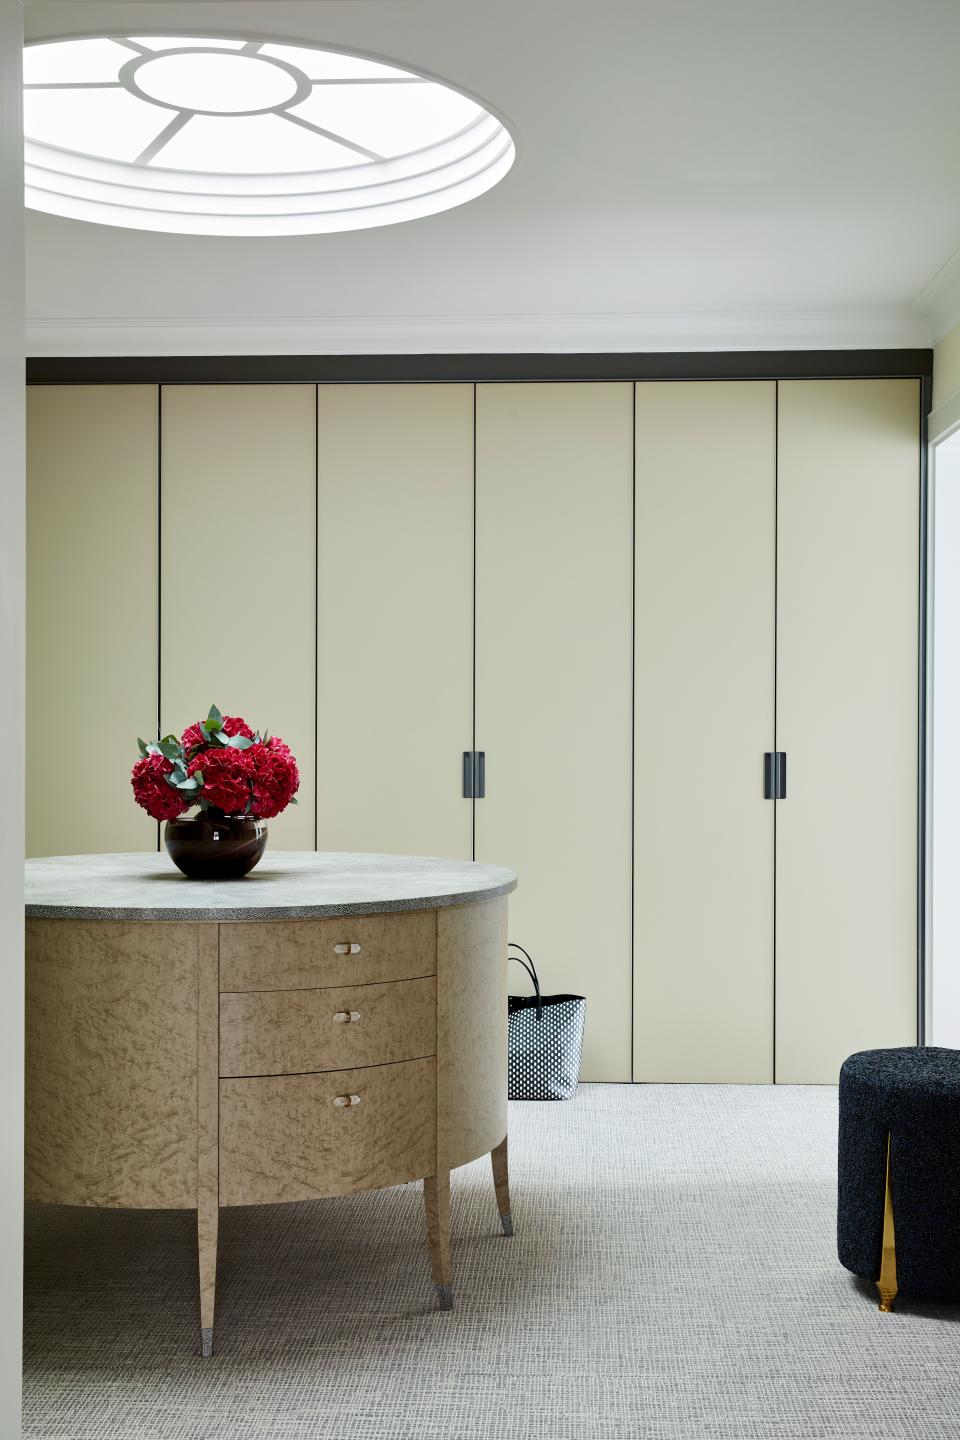 As there are no windows in this dressing room, LyonsKelly introduced a circular skylight above the shagreen-topped island made by Zelouf & Bell. The matte glass wardrobes are by Rimadesio for Minima while the rug is from Stark Carpet.